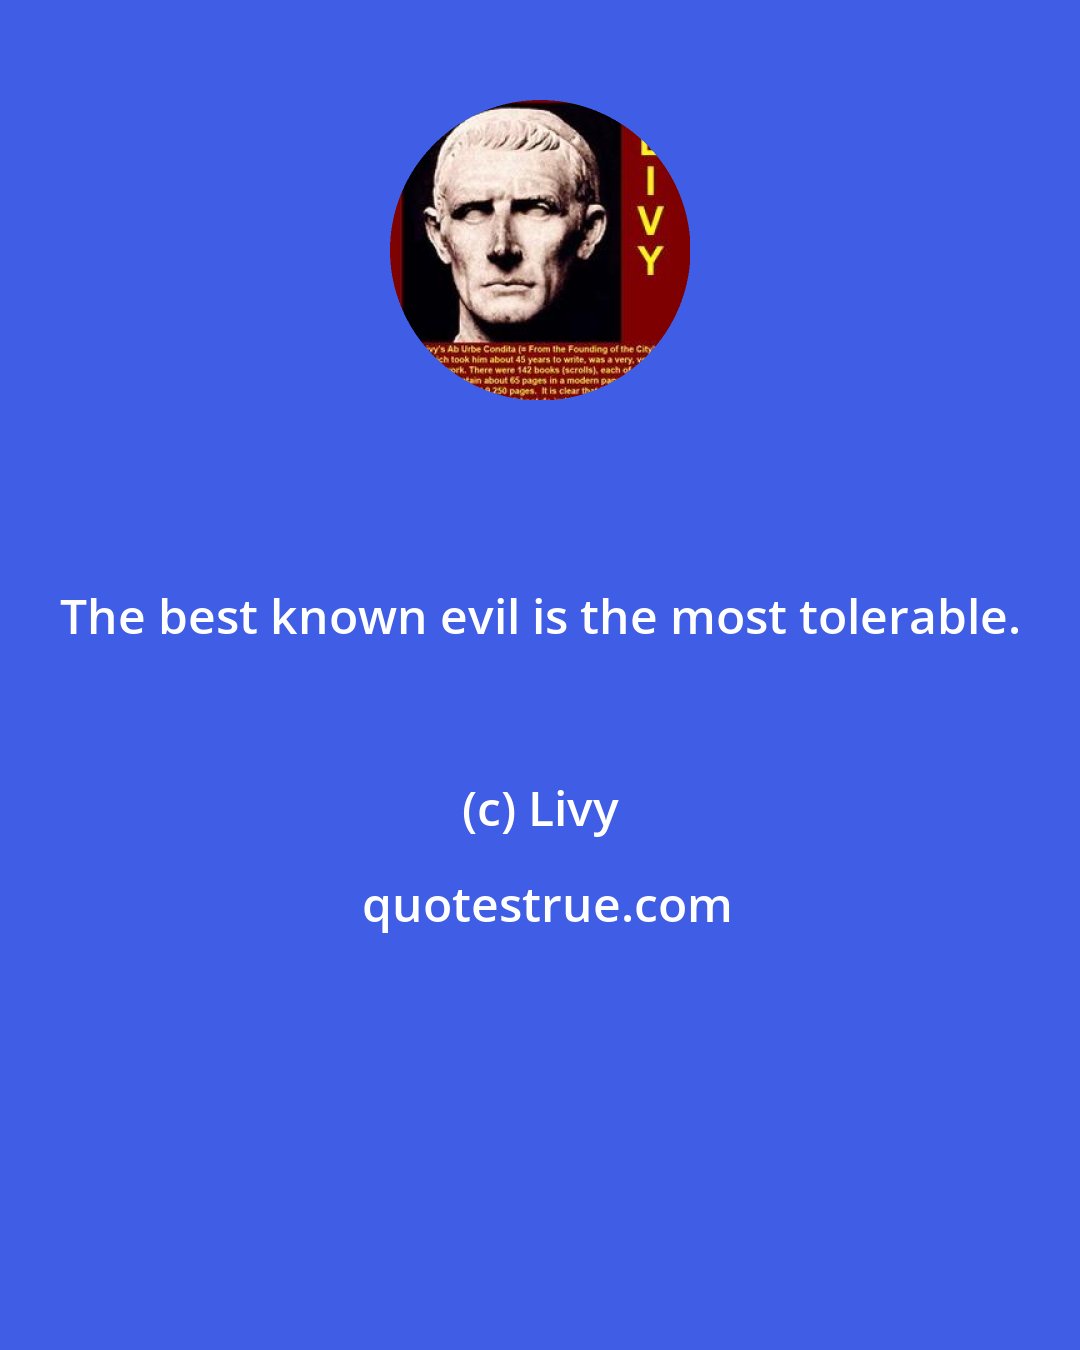 Livy: The best known evil is the most tolerable.